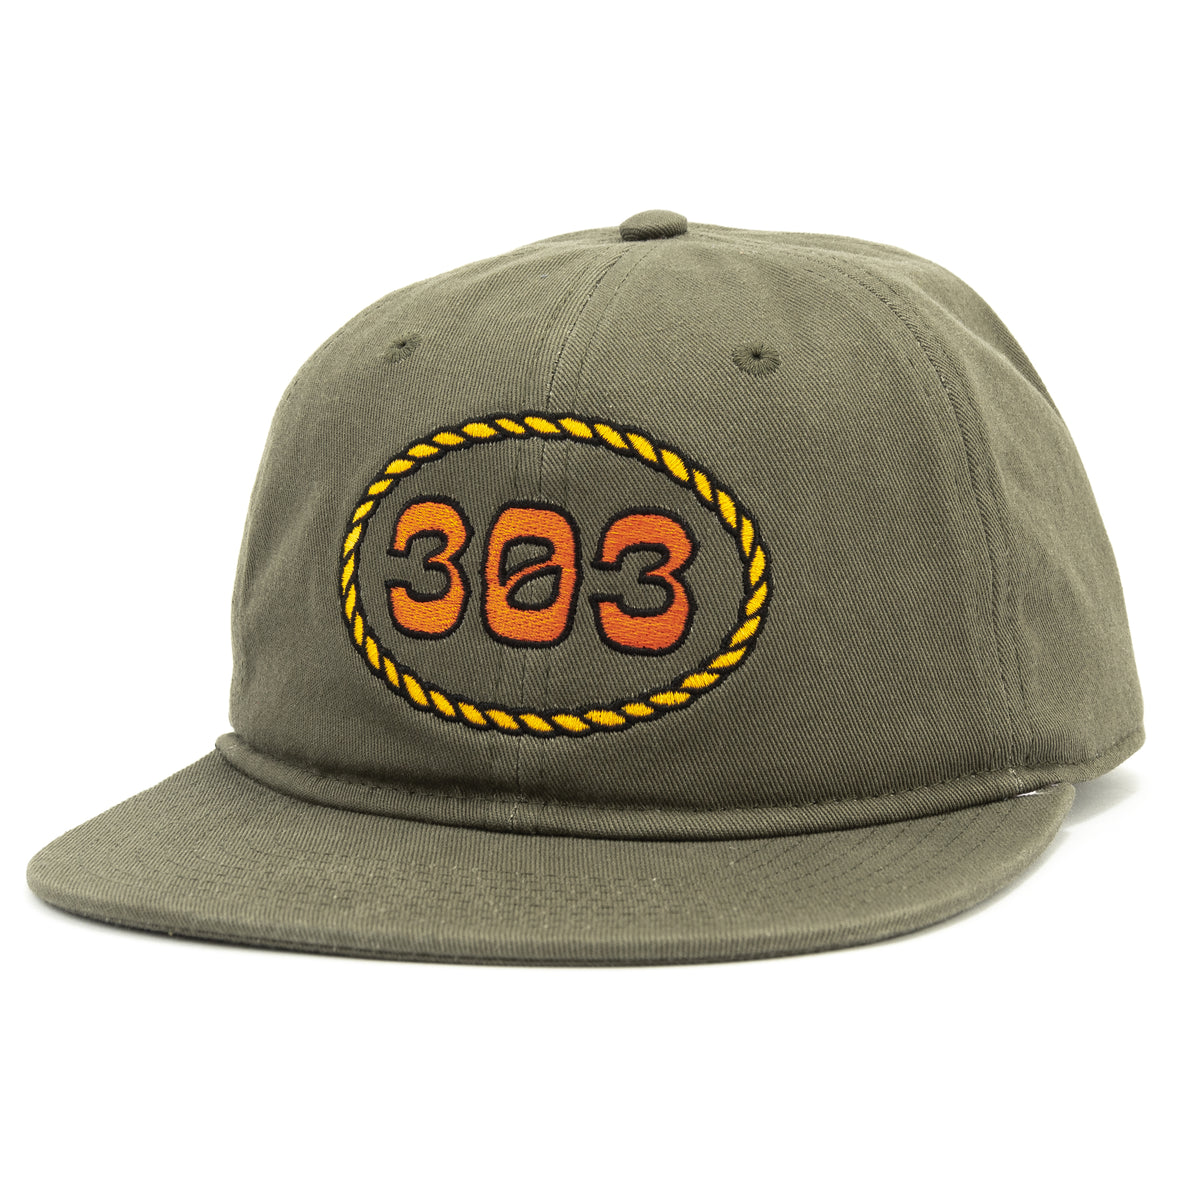 303 Boards - Nuts to Butts Hat 2 (Army Green) – 303boards.com